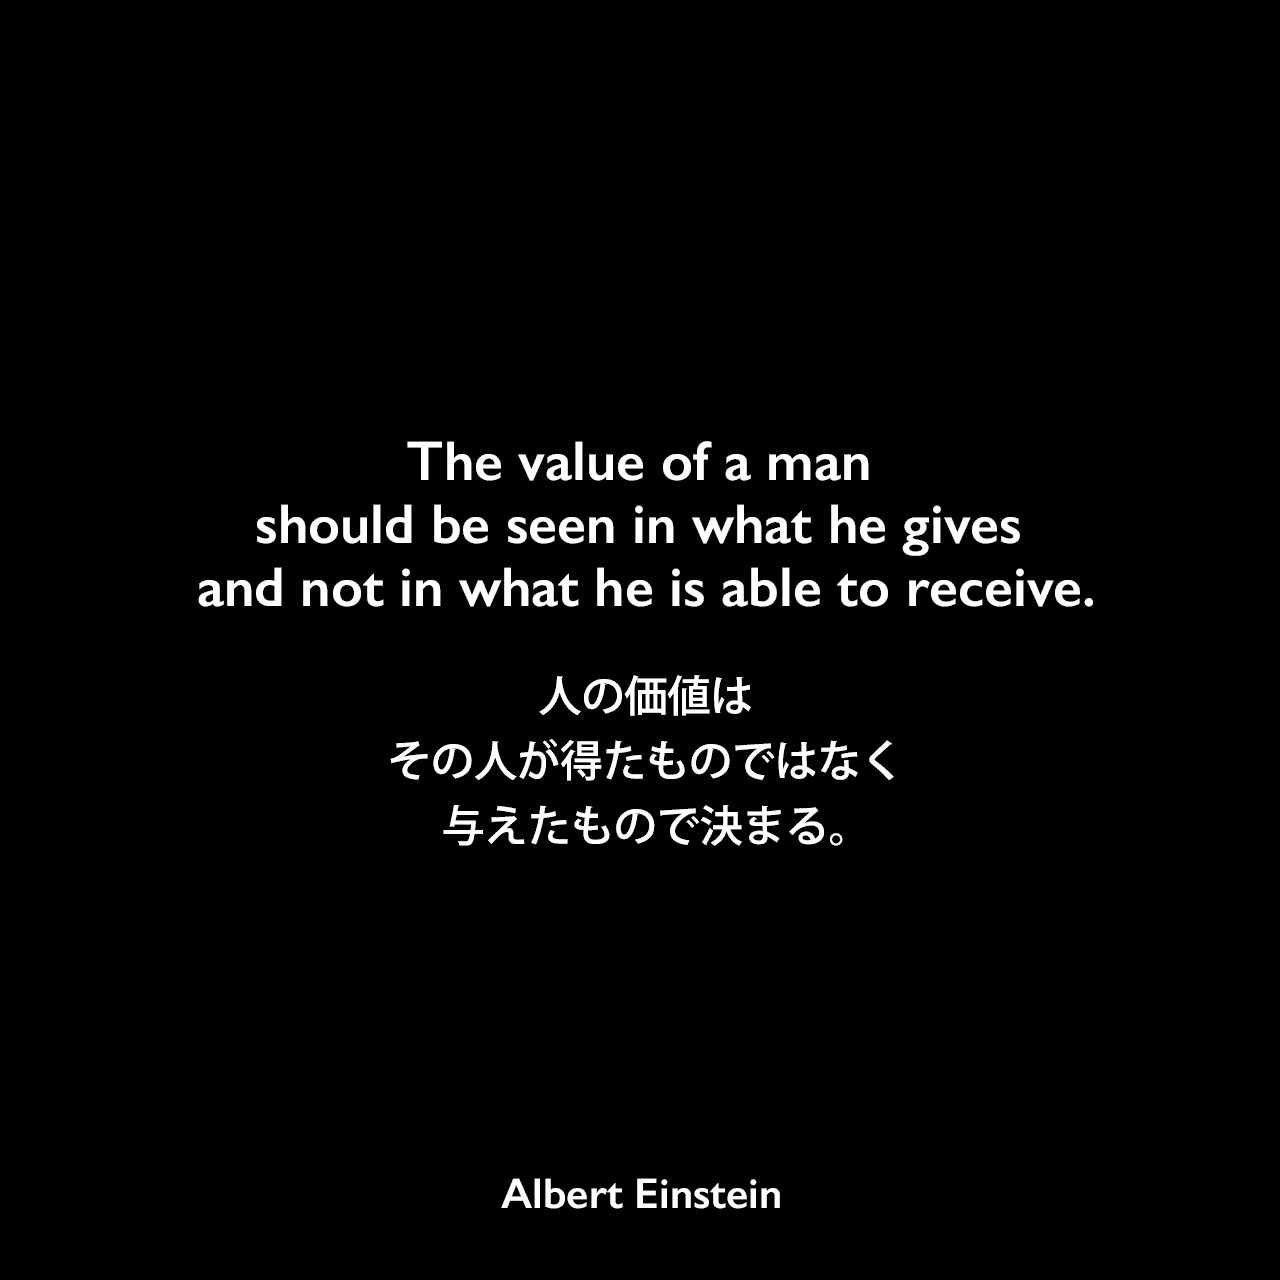 The value of a man should be seen in what he gives and not in what he is able to receive.人の価値は、その人が得たものではなく、与えたもので決まる。